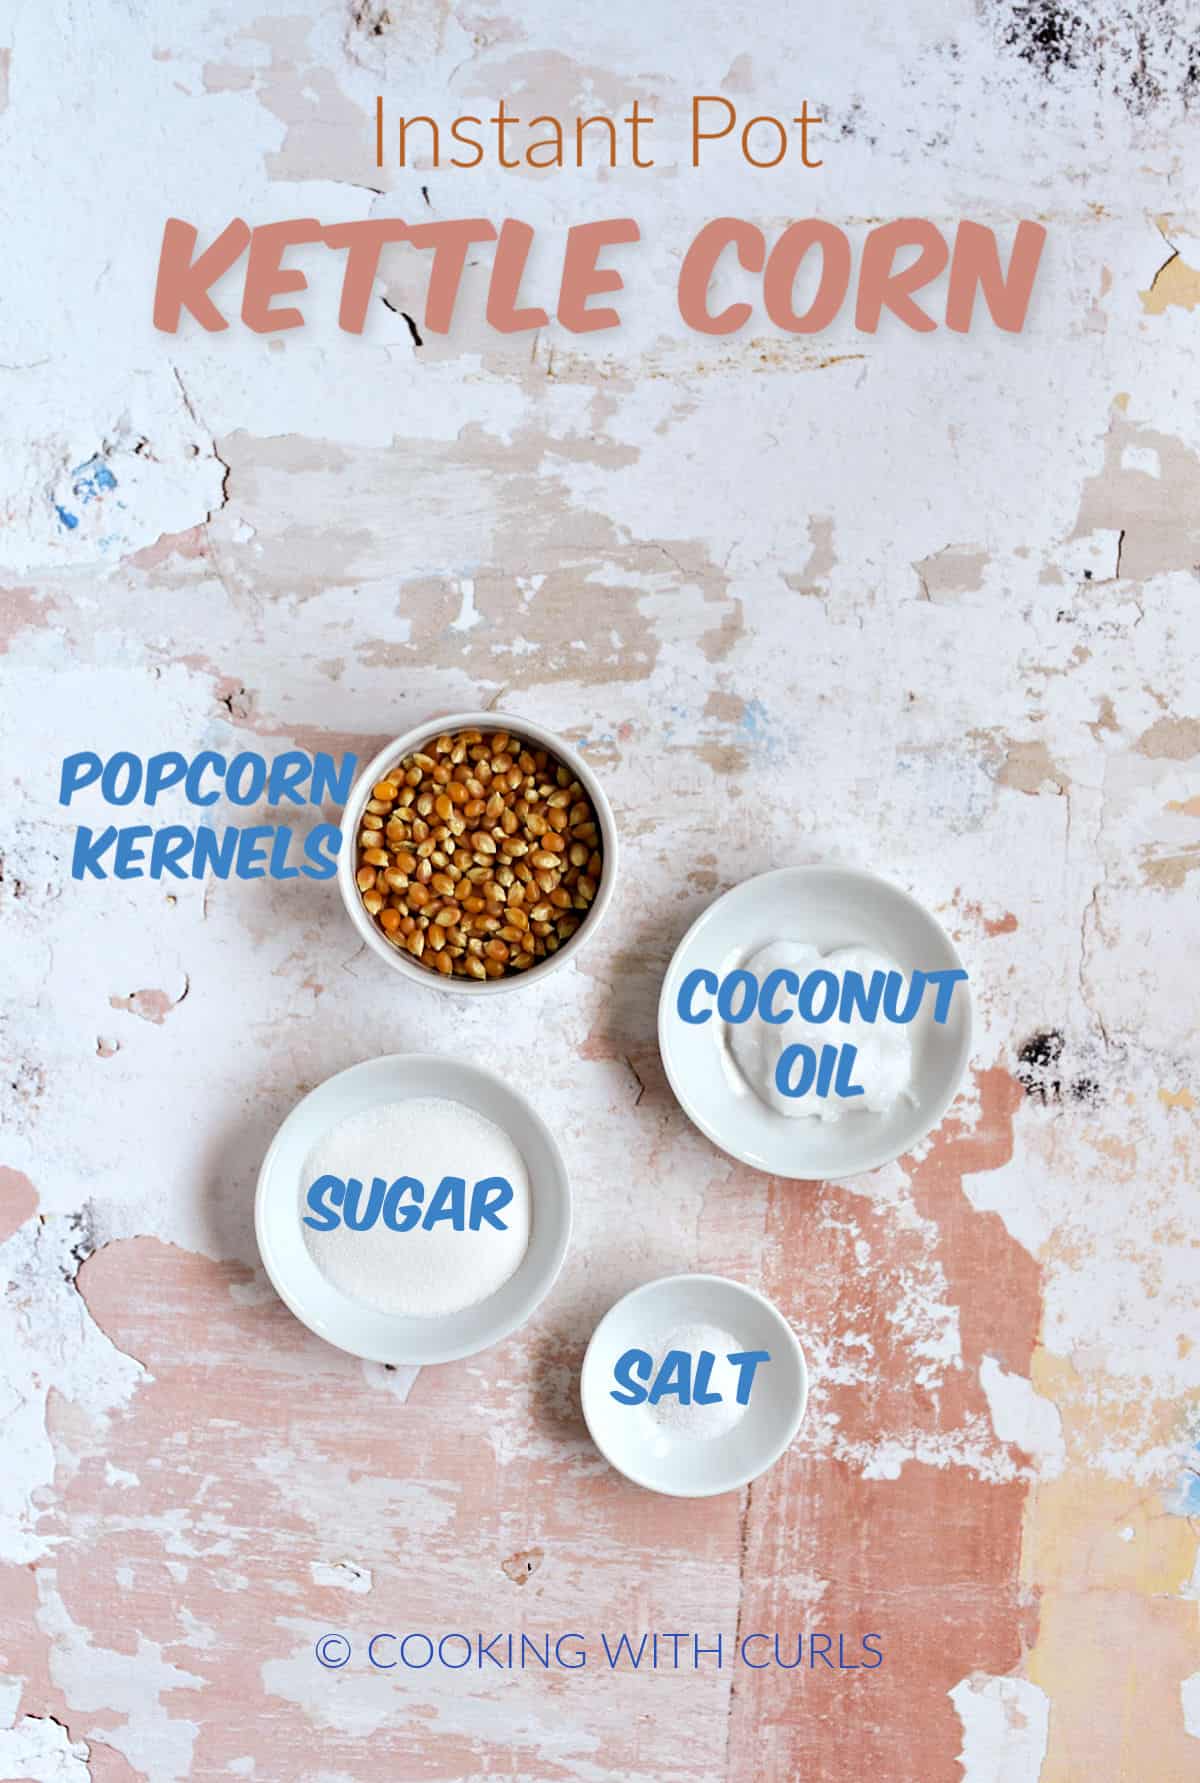 Popcorn kernels, coconut oil, sugar, and salt in small white bowls. 